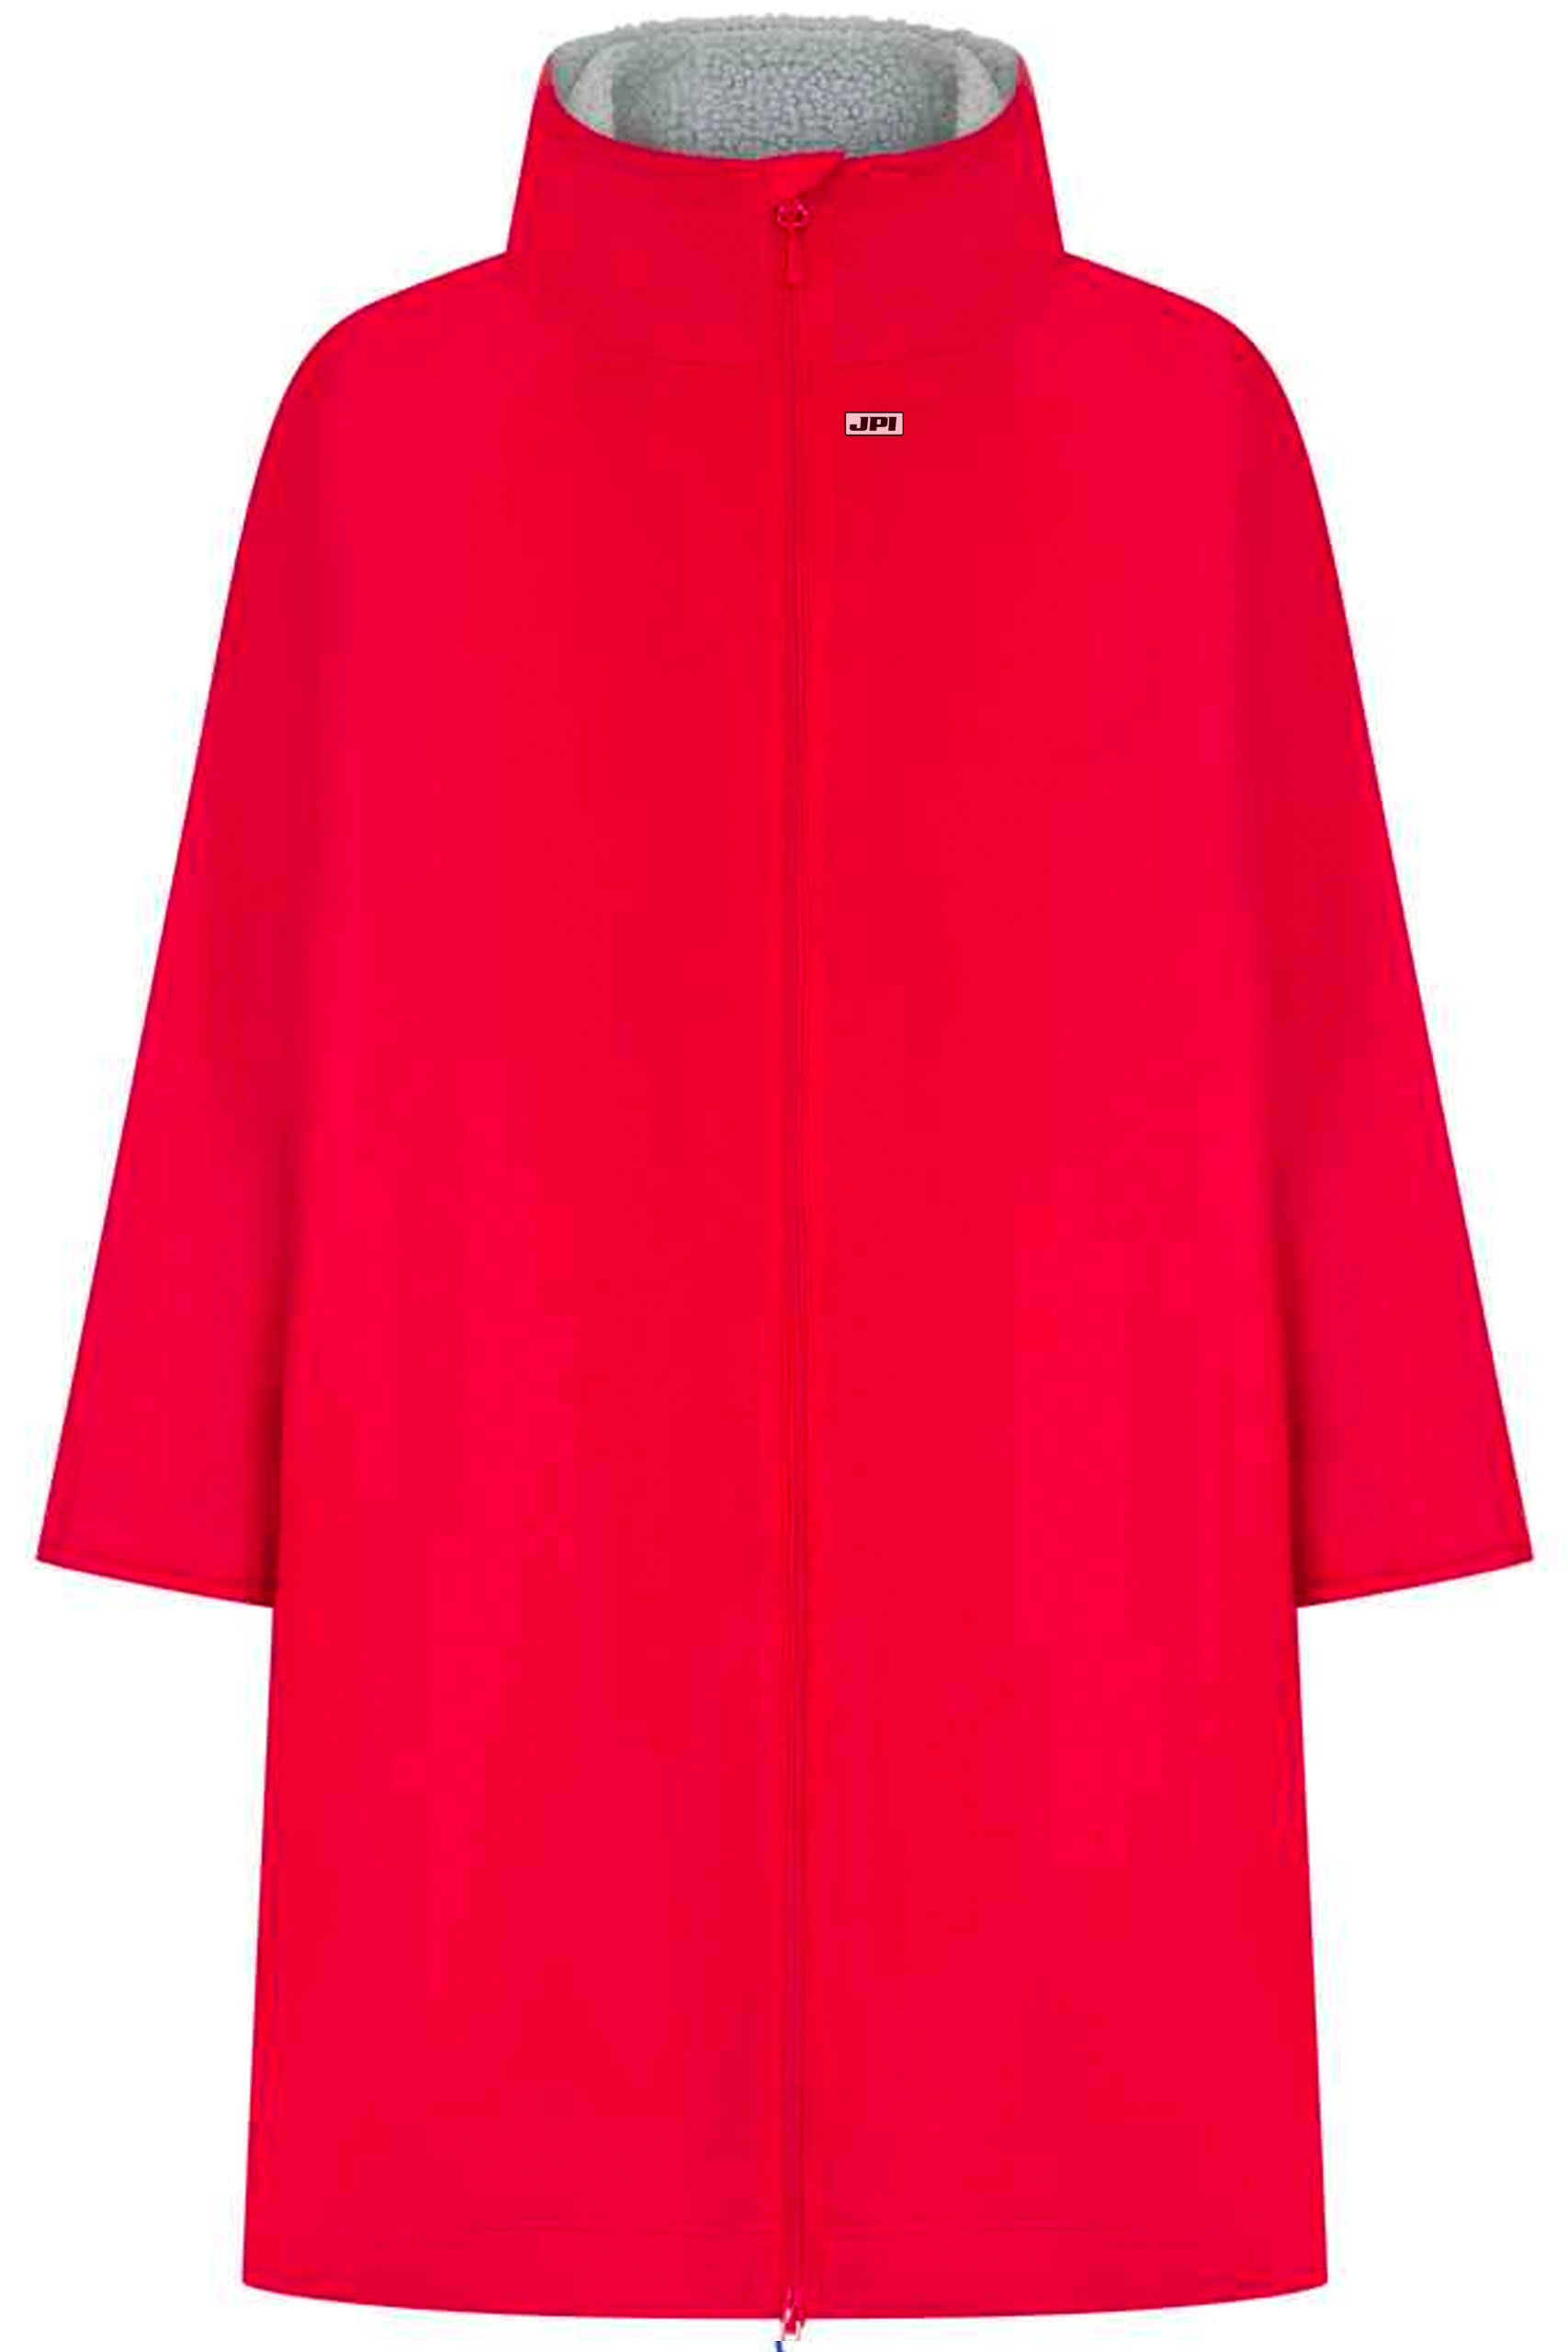 JPI Robe. All weather robe, teddy fleece lining, waterproof and windproof. Picture shows red robe.